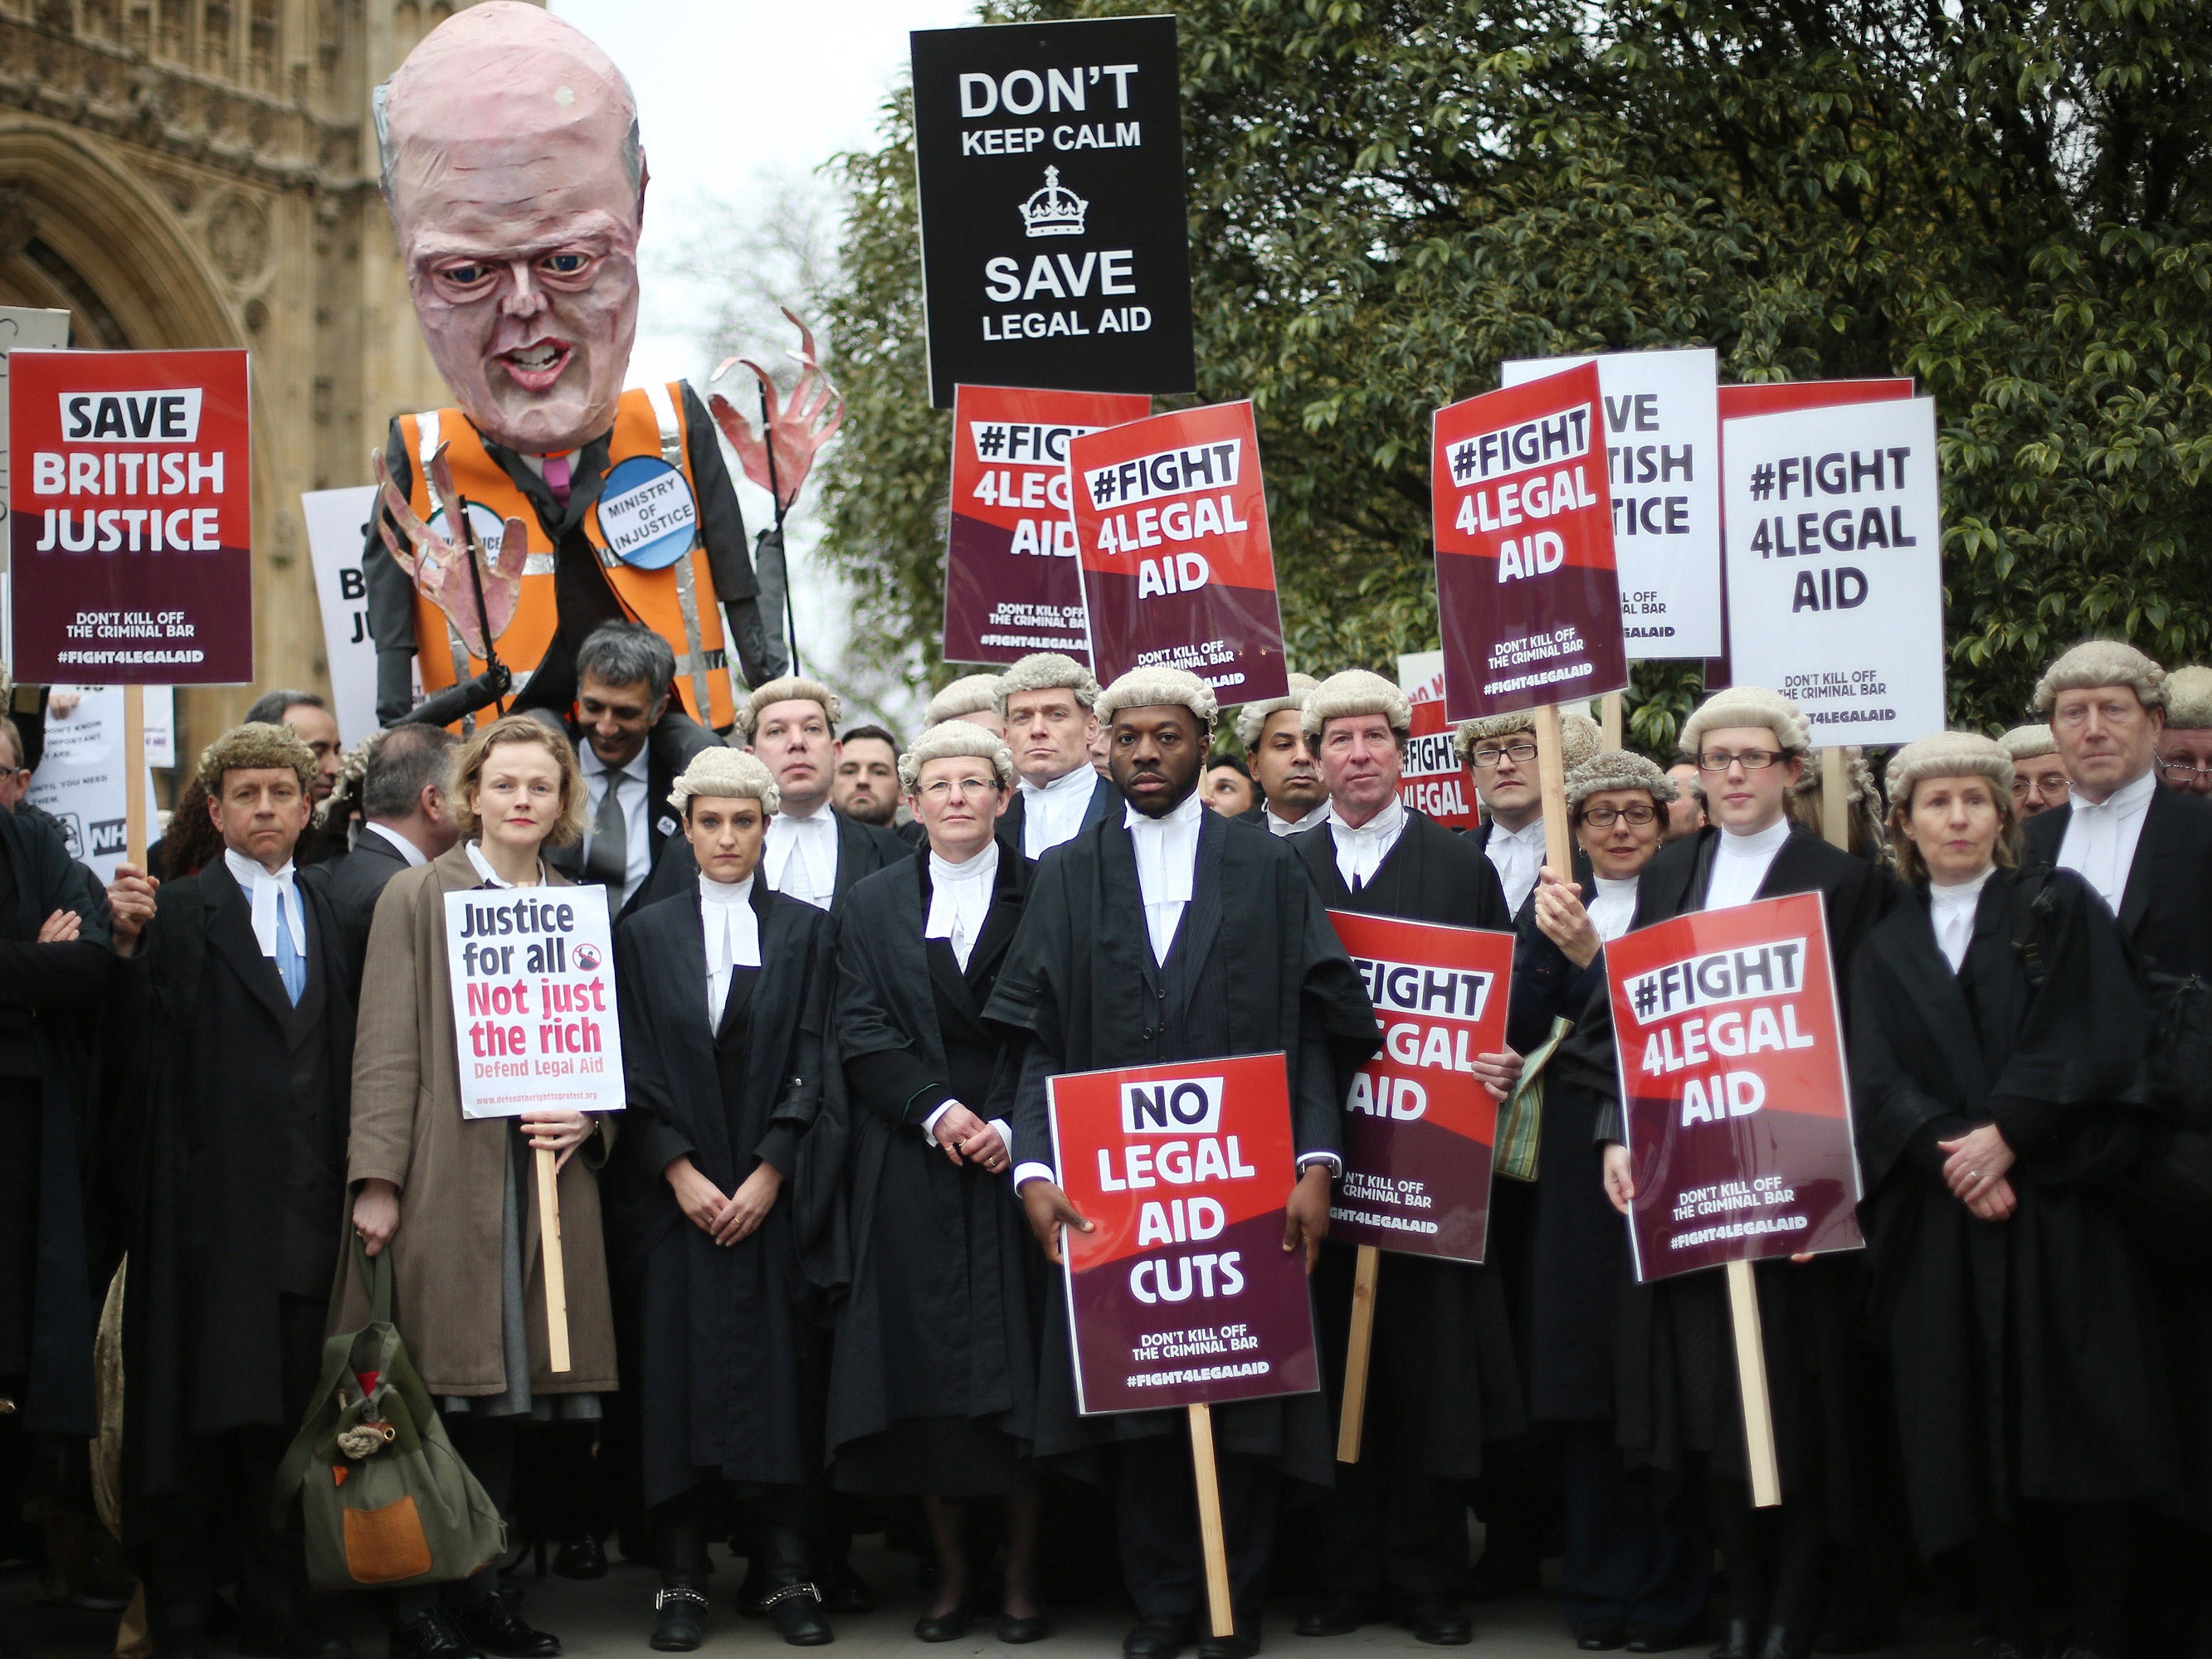 Lawyers argue cuts to legal aid will restrict access to justice